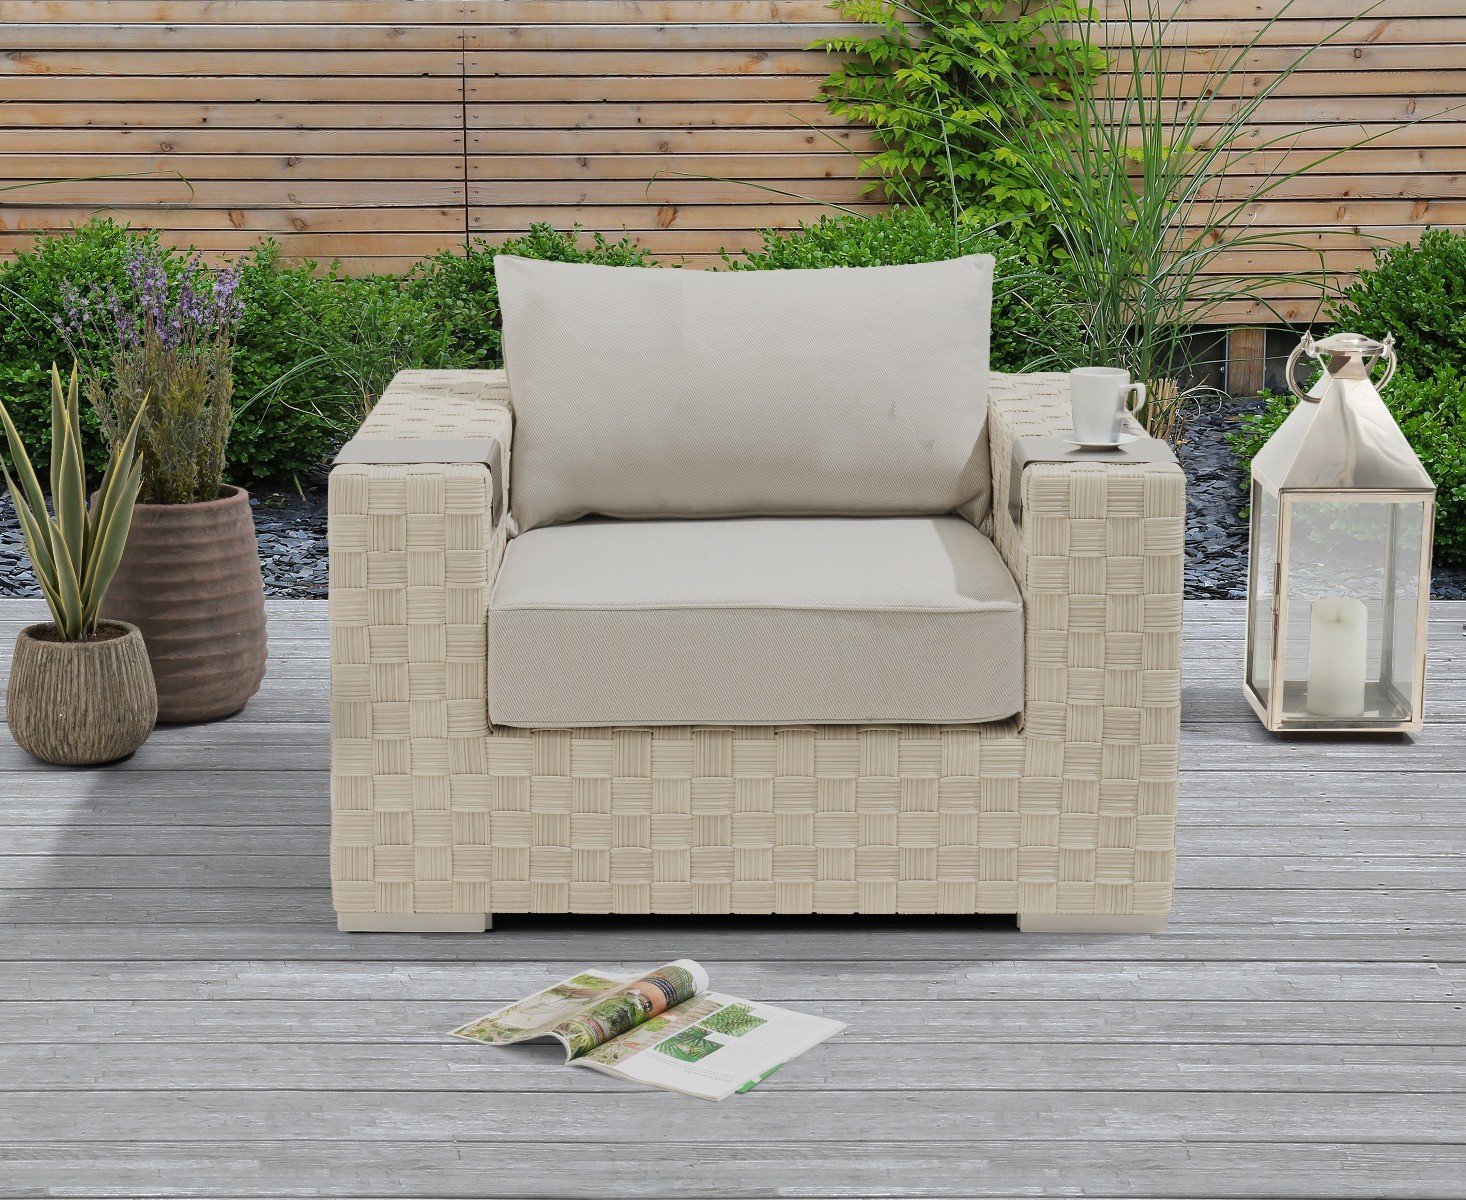 An image of Cardinal Ivory and Cream Rattan Wicker Garden Chair